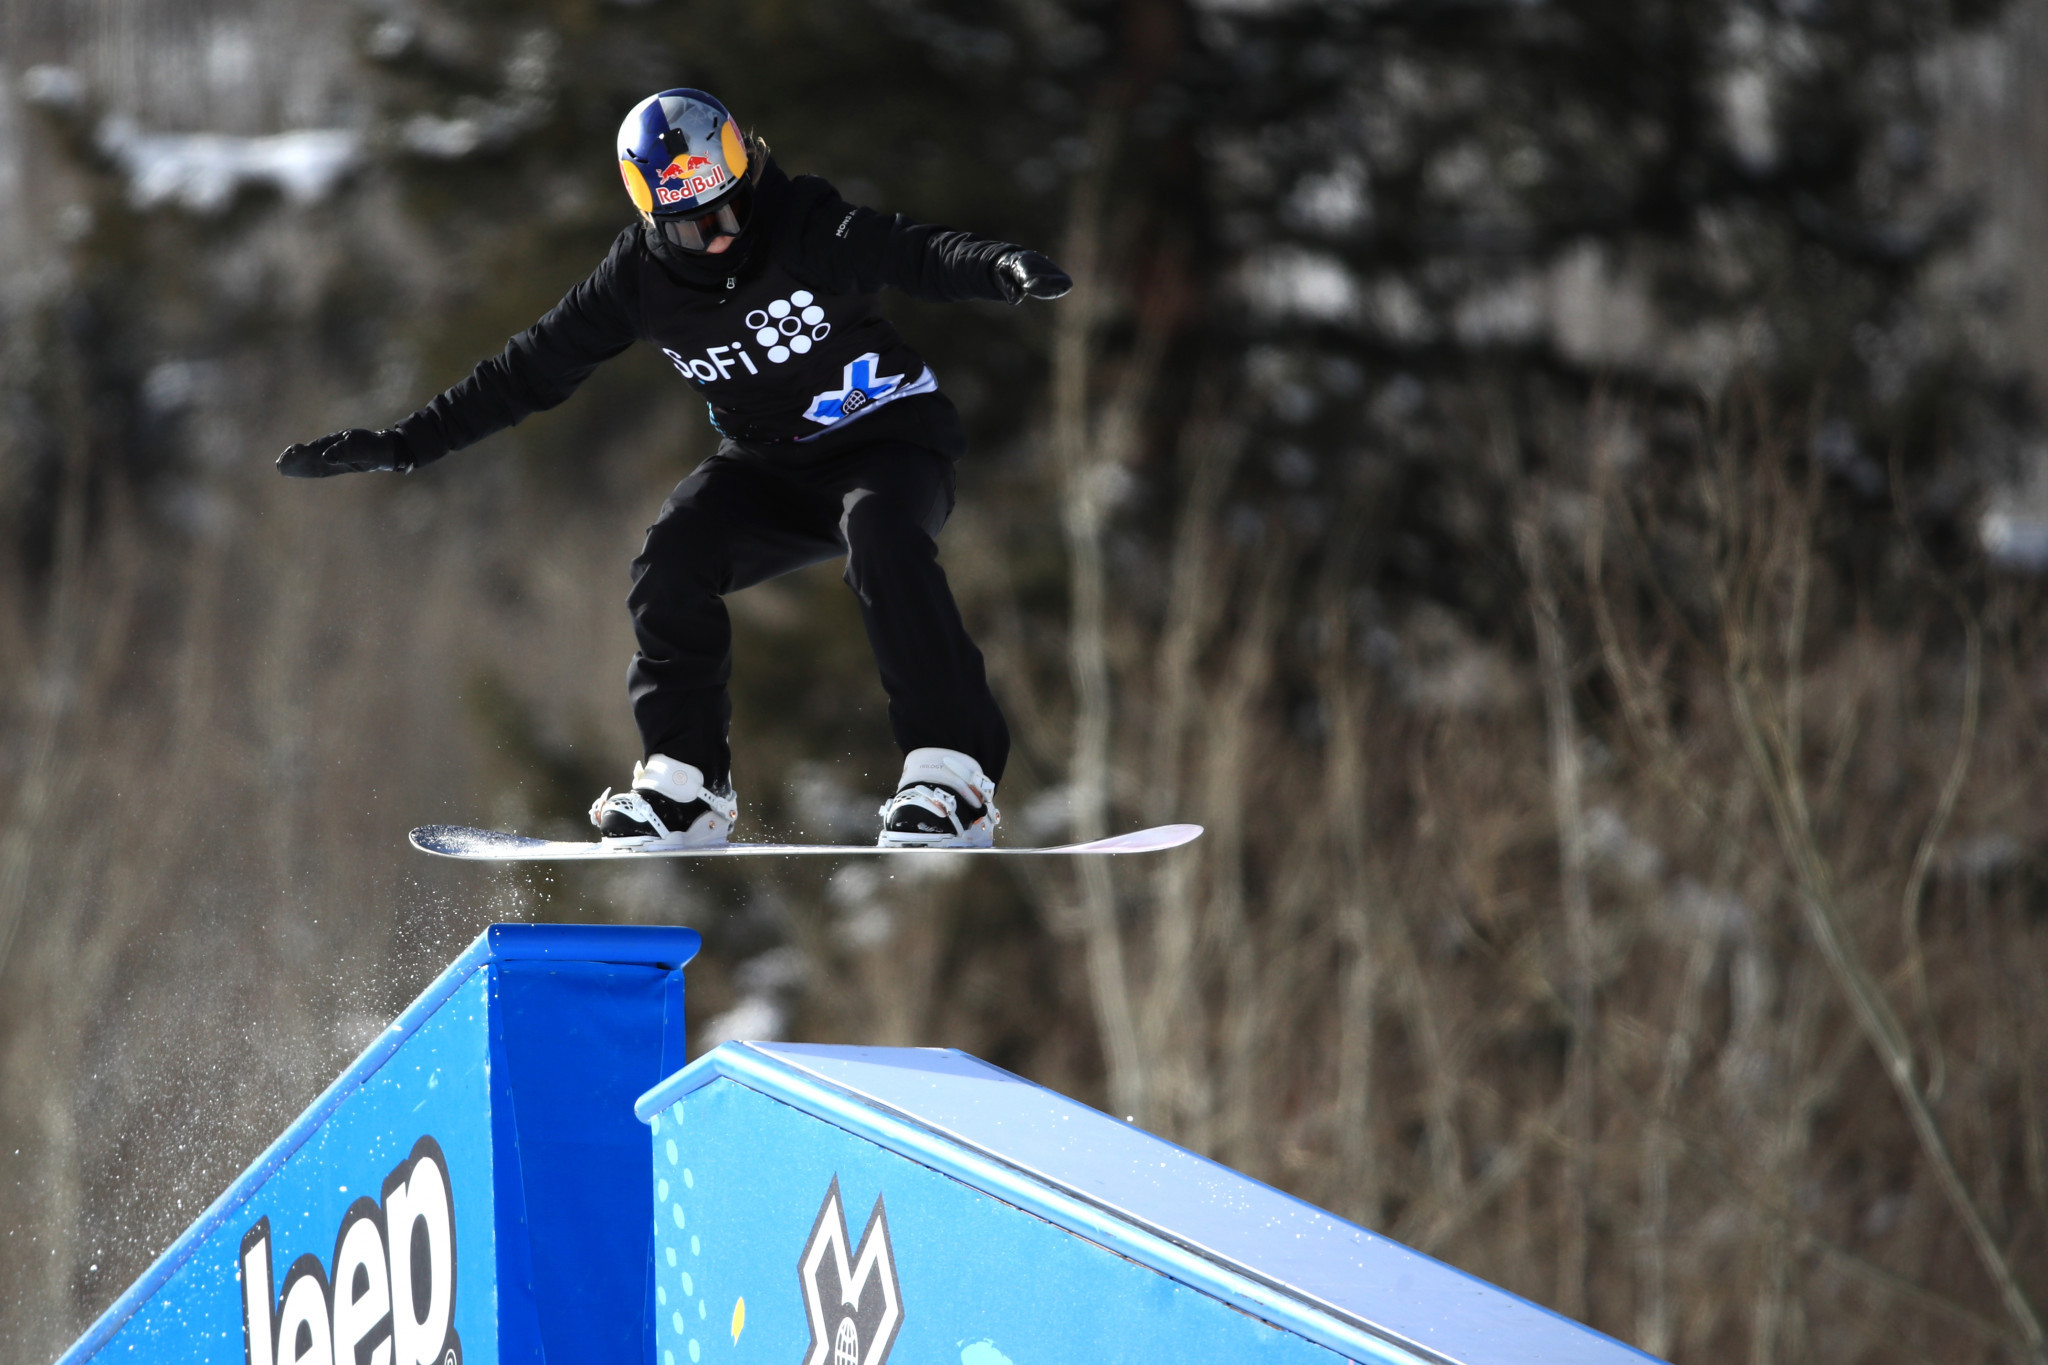 The New Zealand Winter Games have announced snowboarder Zoi Sadowski-Synnott, an Olympic bronze medallist at Pyeongchang 2018, as an ambassador ©Getty Images